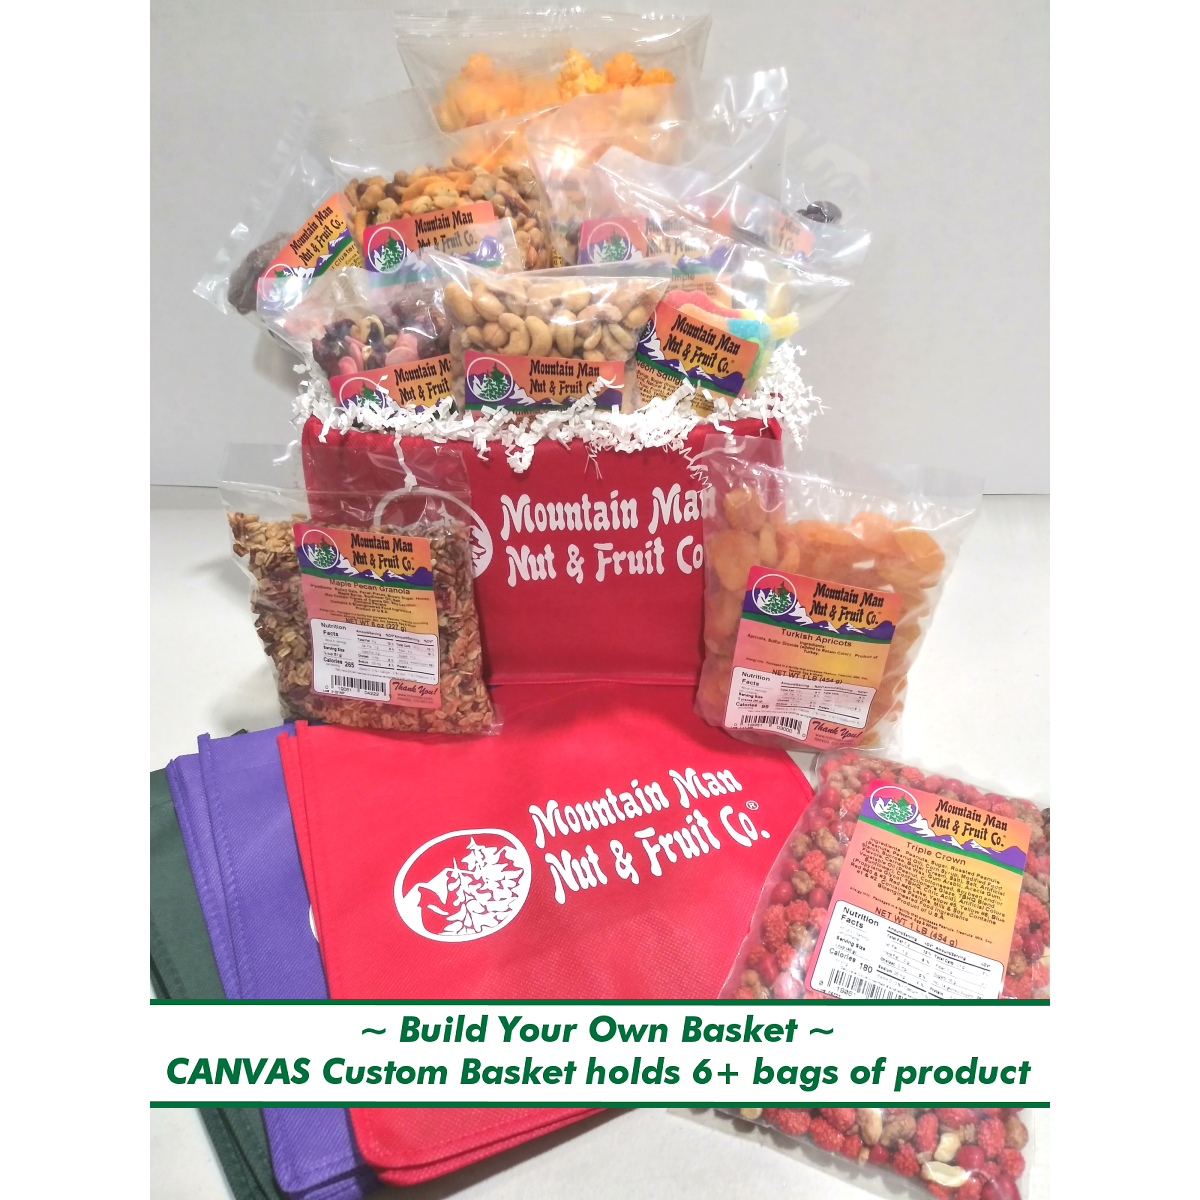 Build Your Own Red Canvas Custom Basket holds 6+ bags of product